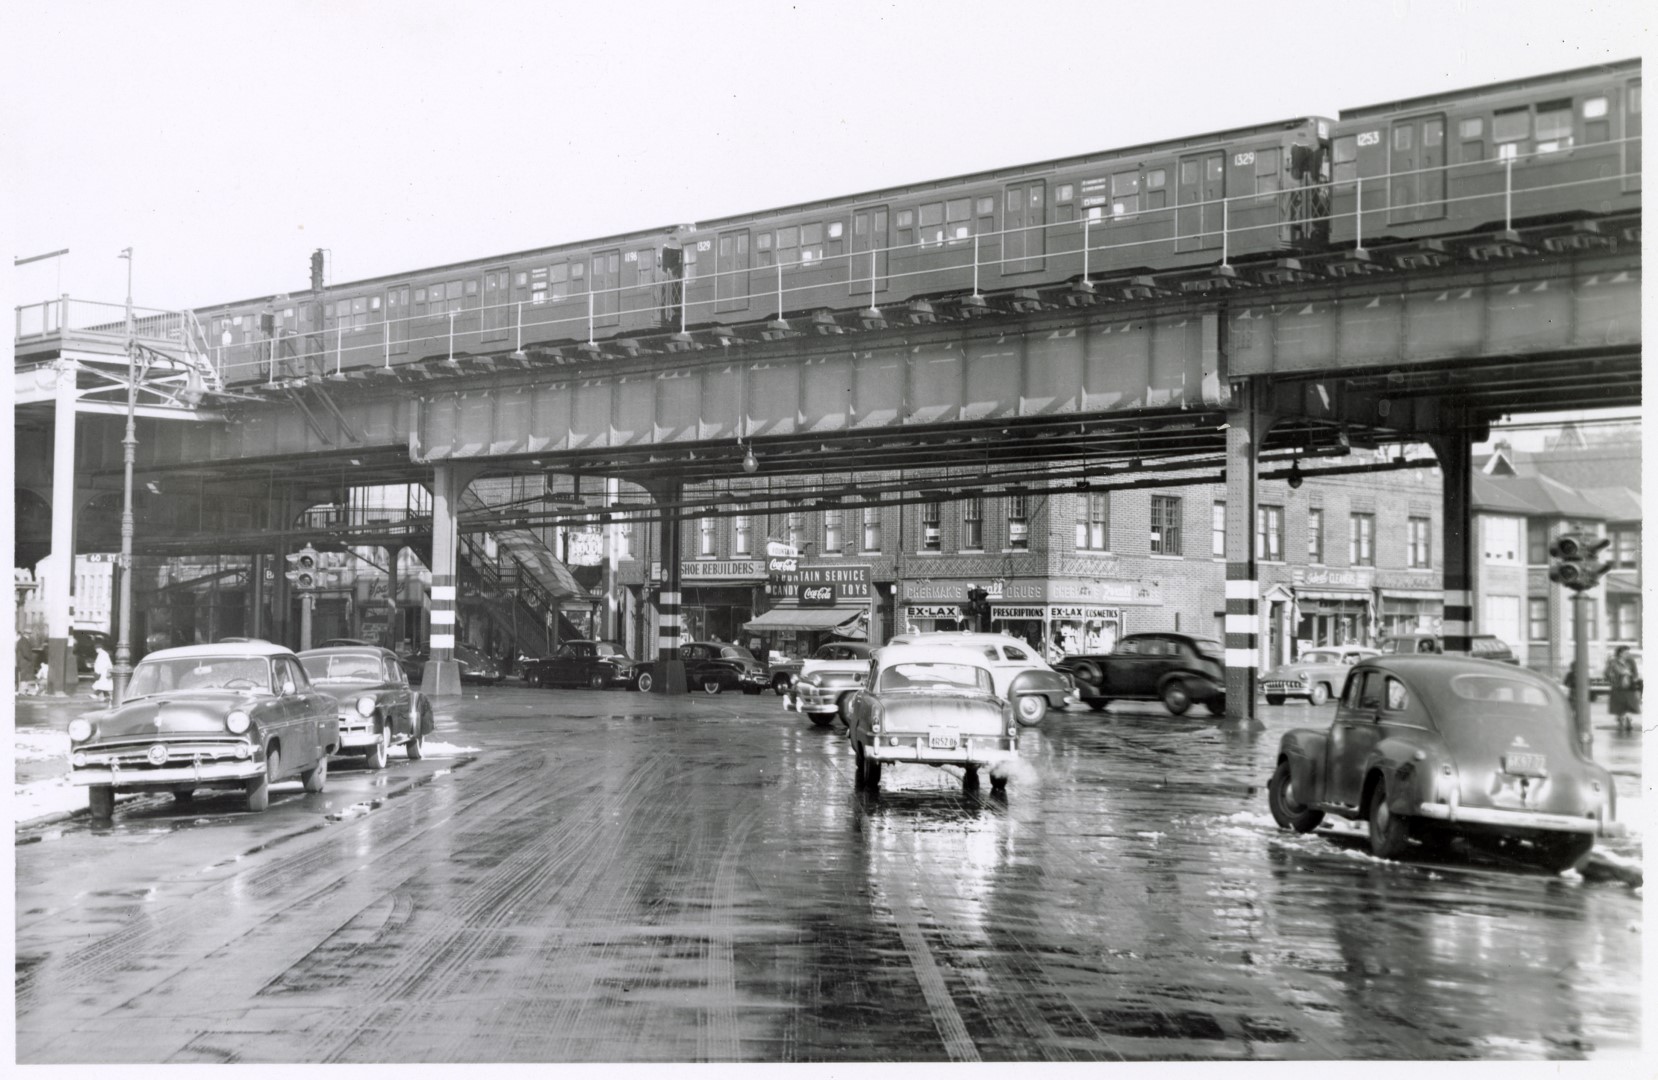 R-6 cars on the Culver Line, 1955